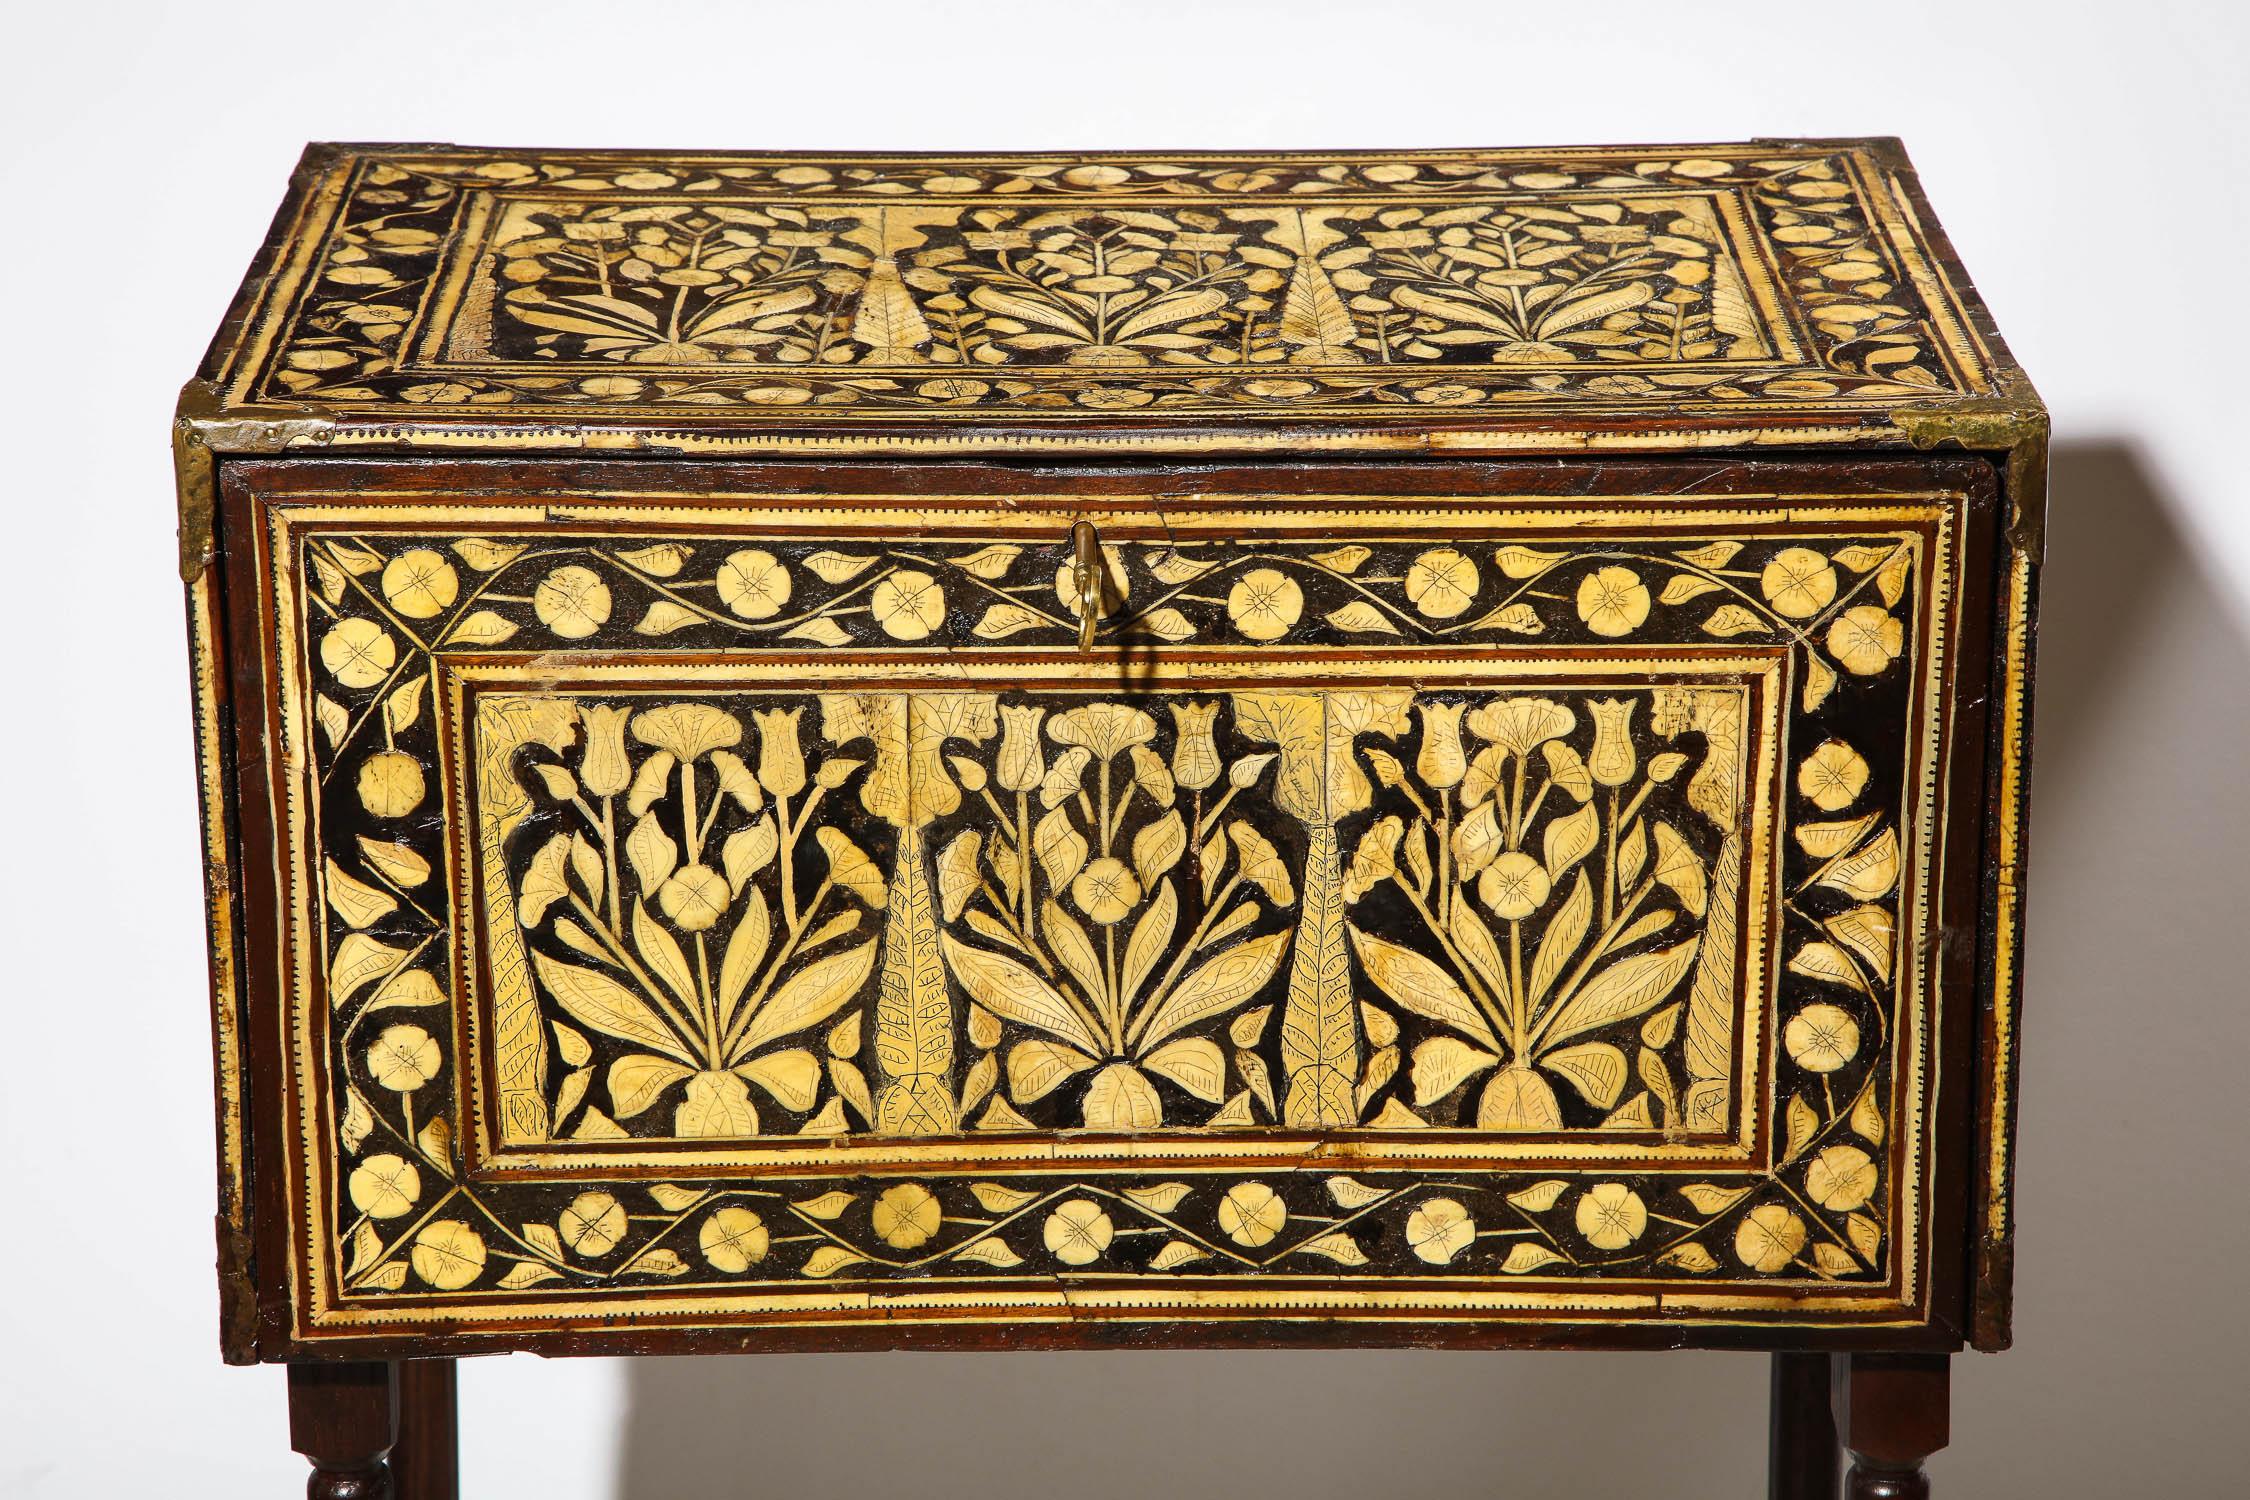 Anglo-Indian Indo-Portuguese Bone-Inlaid Fall Front Cabinet, Mughal India, 17th-18th Century